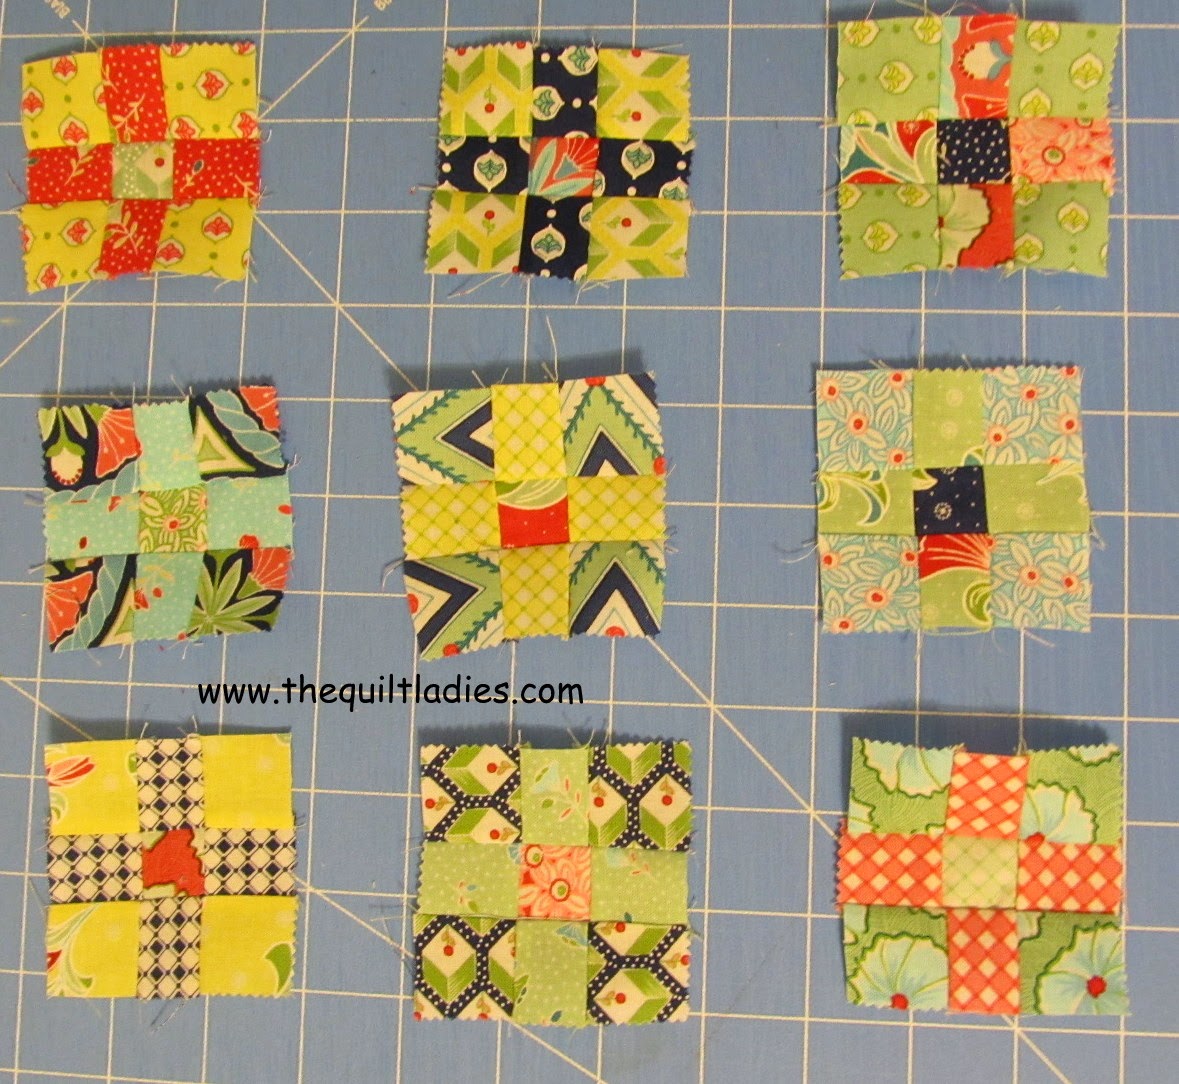 How to make a 9-Patch Table Topper Quilt Pattern and Tutorial